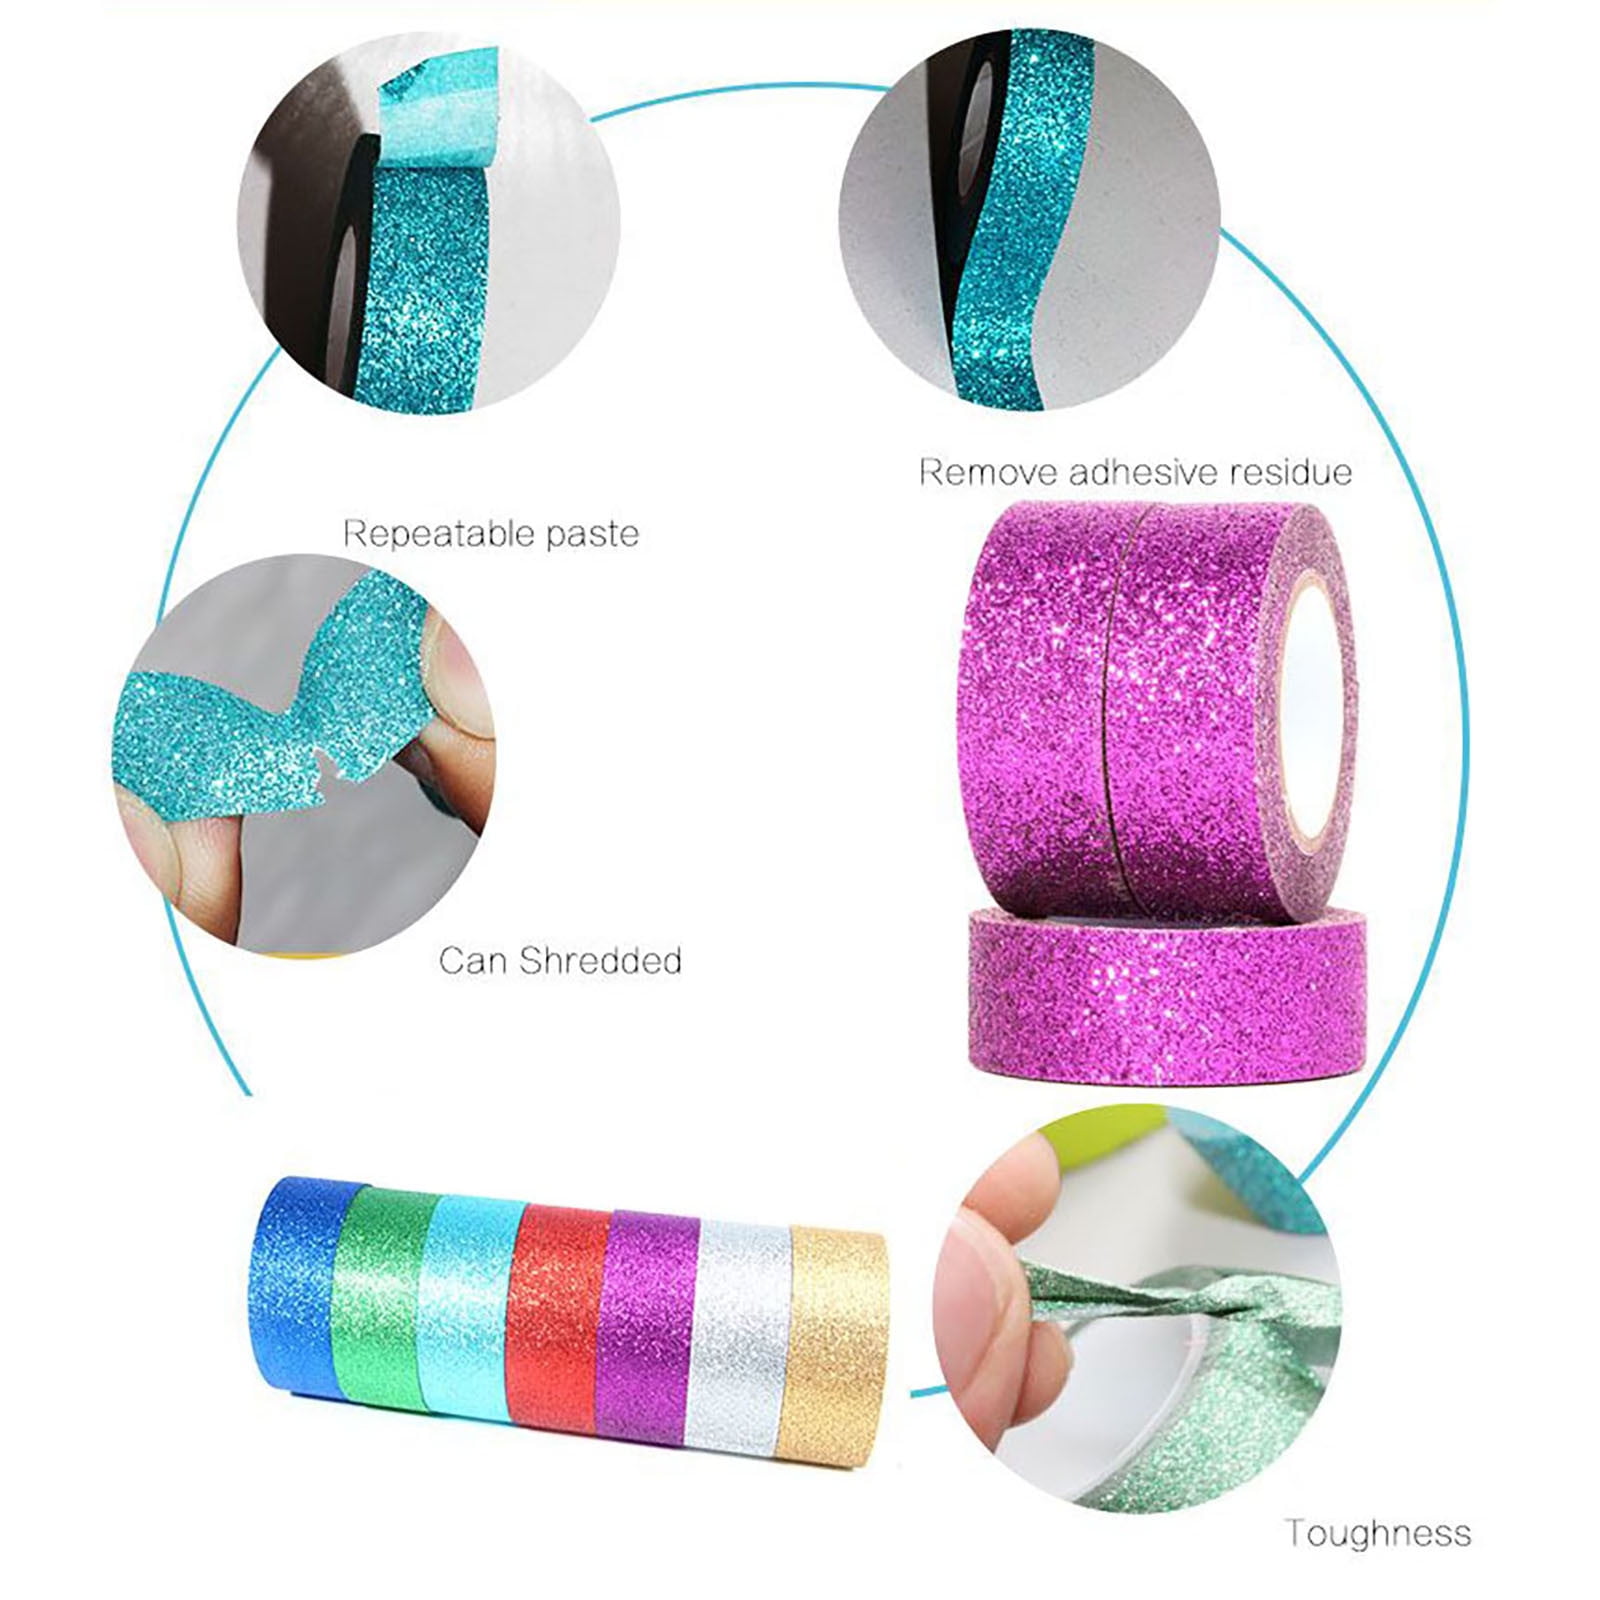 Ploknplq Painters Tape Masking Tape Decorative Tape Craft Self Adhesive  Stickers Adhesive Glitter Decoration for Diy Crafts Gift Packaging  Scrapbooking Etc Packing Tape 